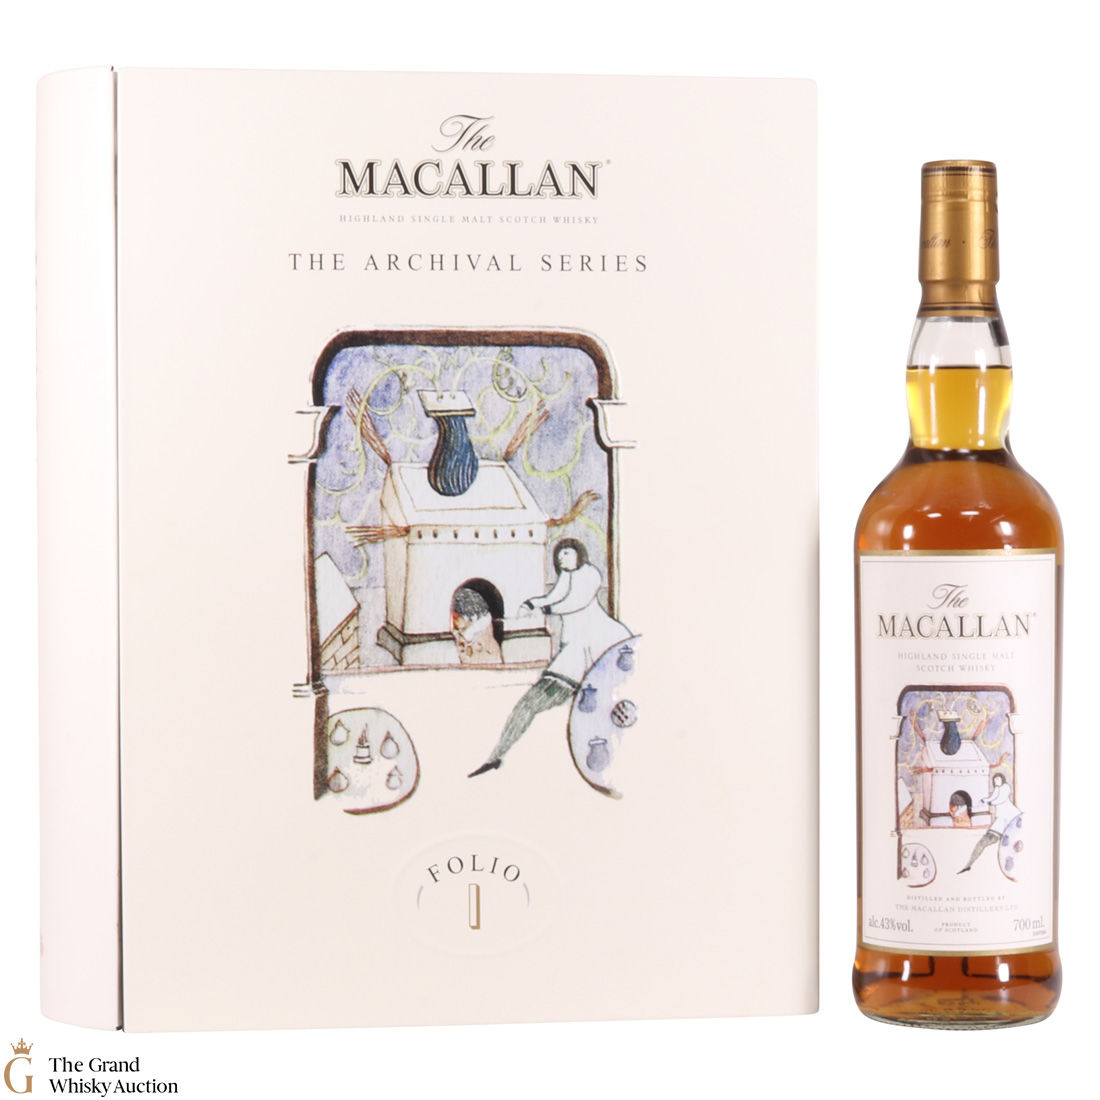 Macallan Archival Series Folio 1 Auction The Grand Whisky Auction